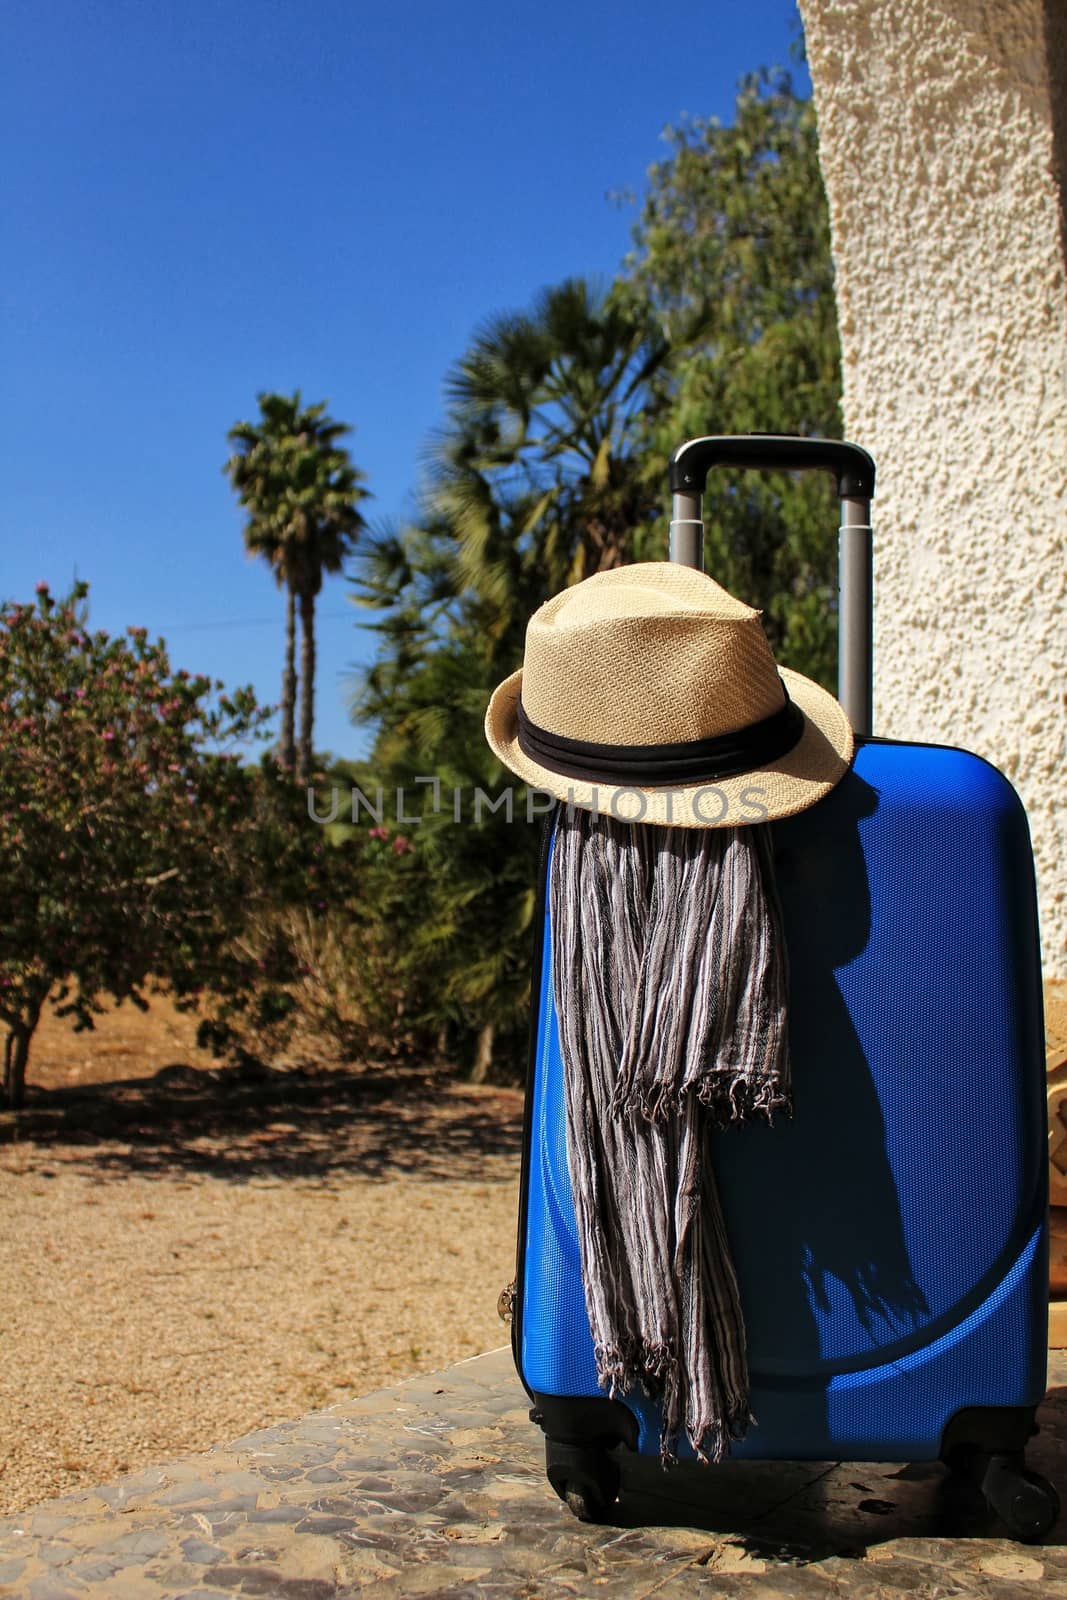 Suitcase prepared for the holidays with striped foulard and white hat. Palm tree and blue sky in the background